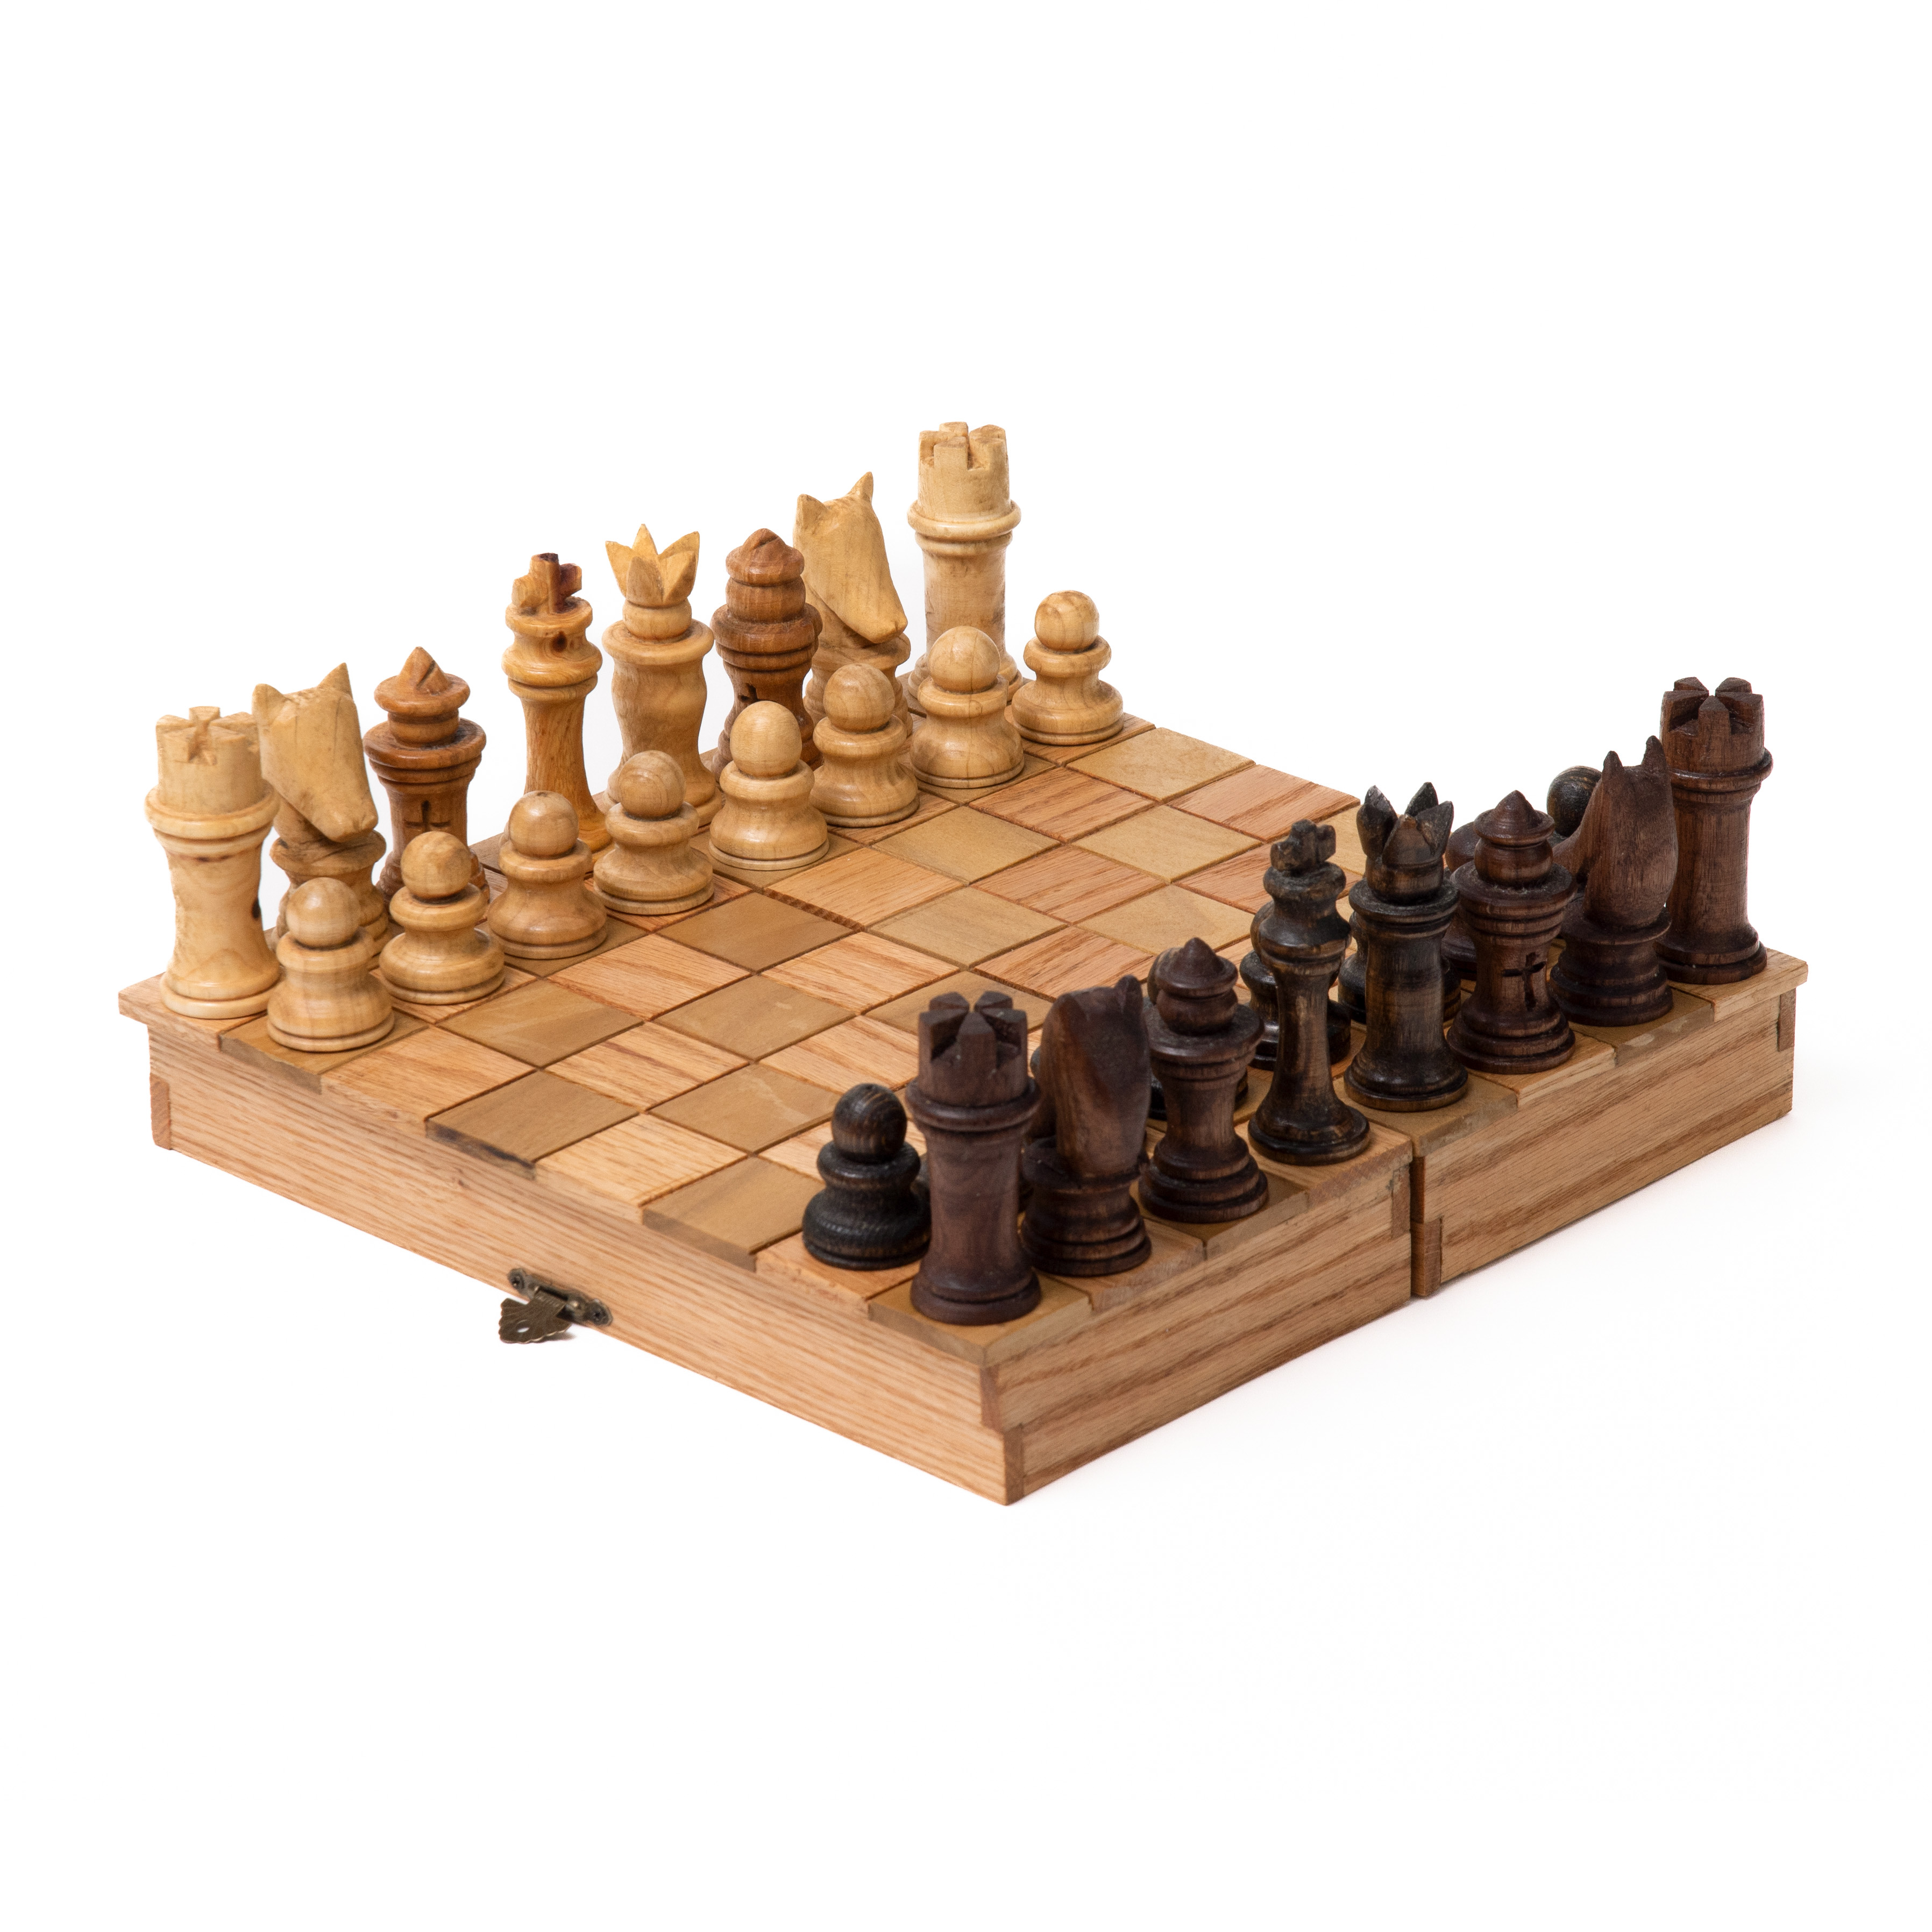 The 7 Best Chess Sets of 2023